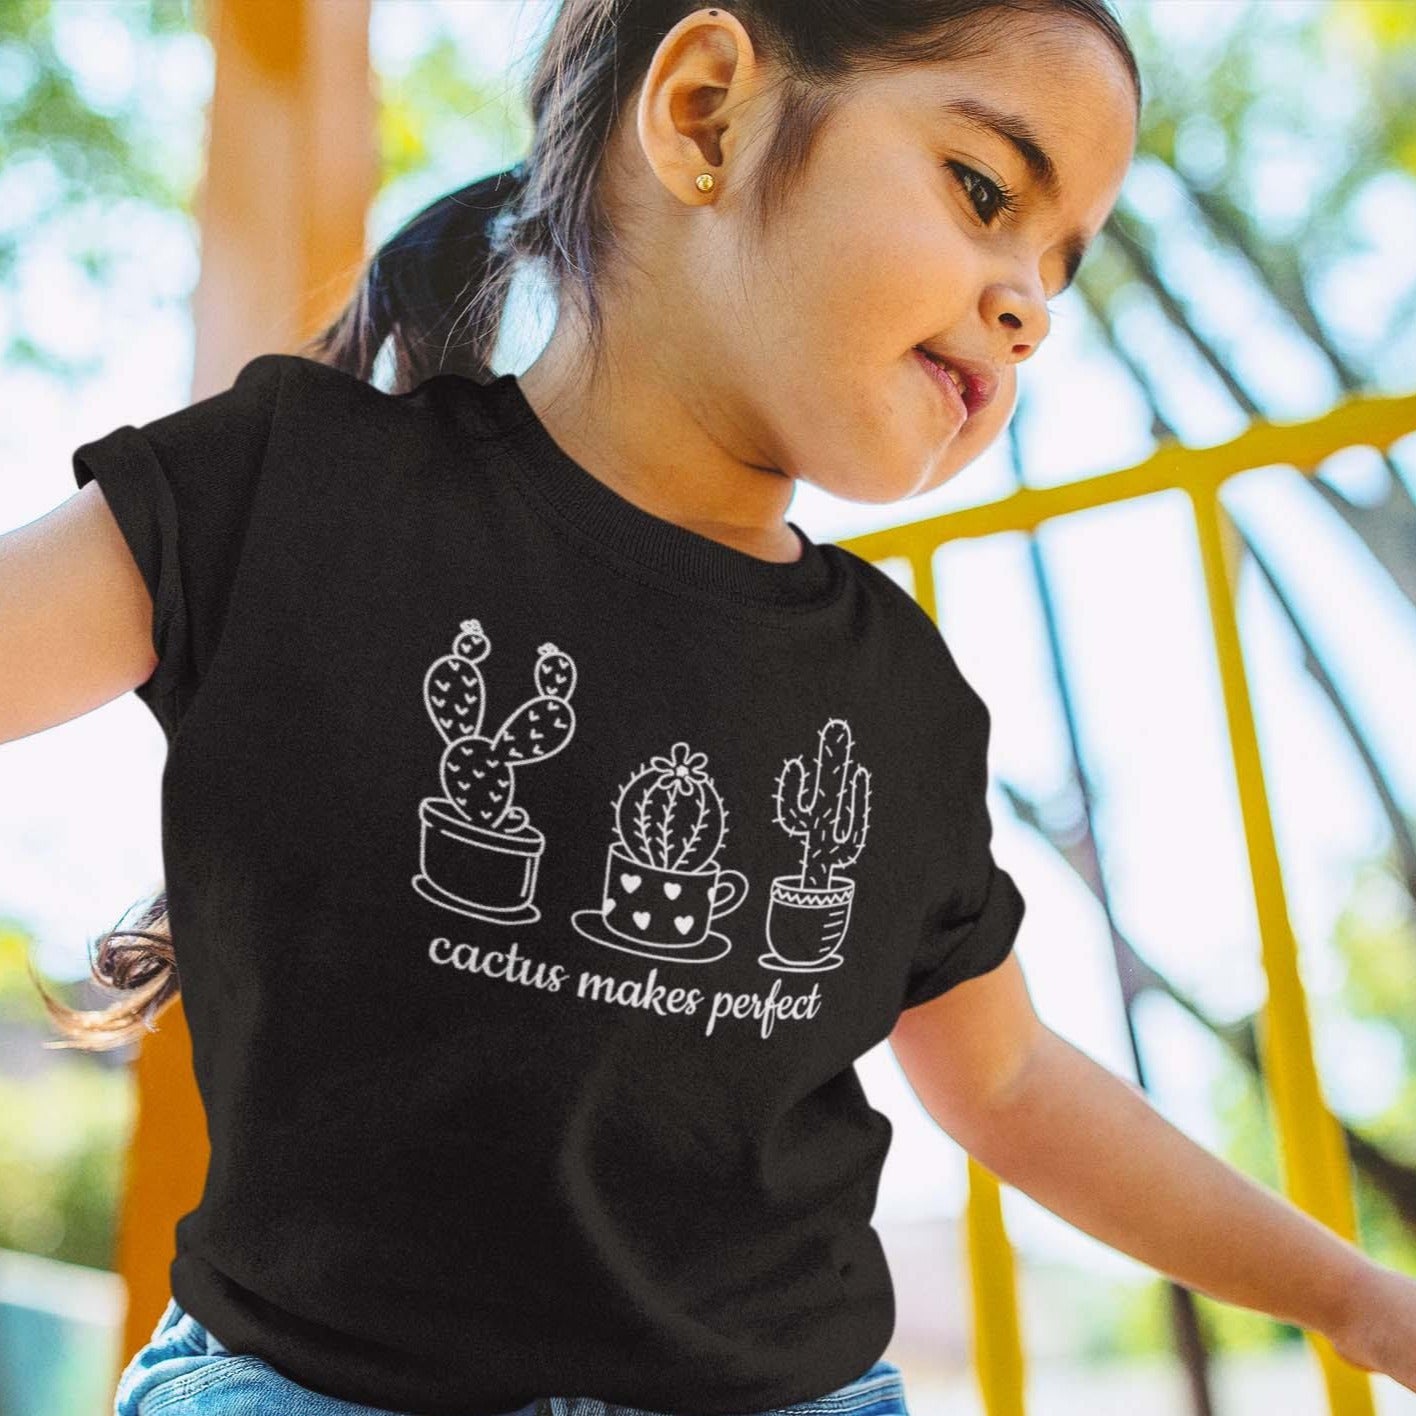 Cactus Makes Perfect - Kids Youth Crew T-Shirt Kids Youth T-shirt Plants